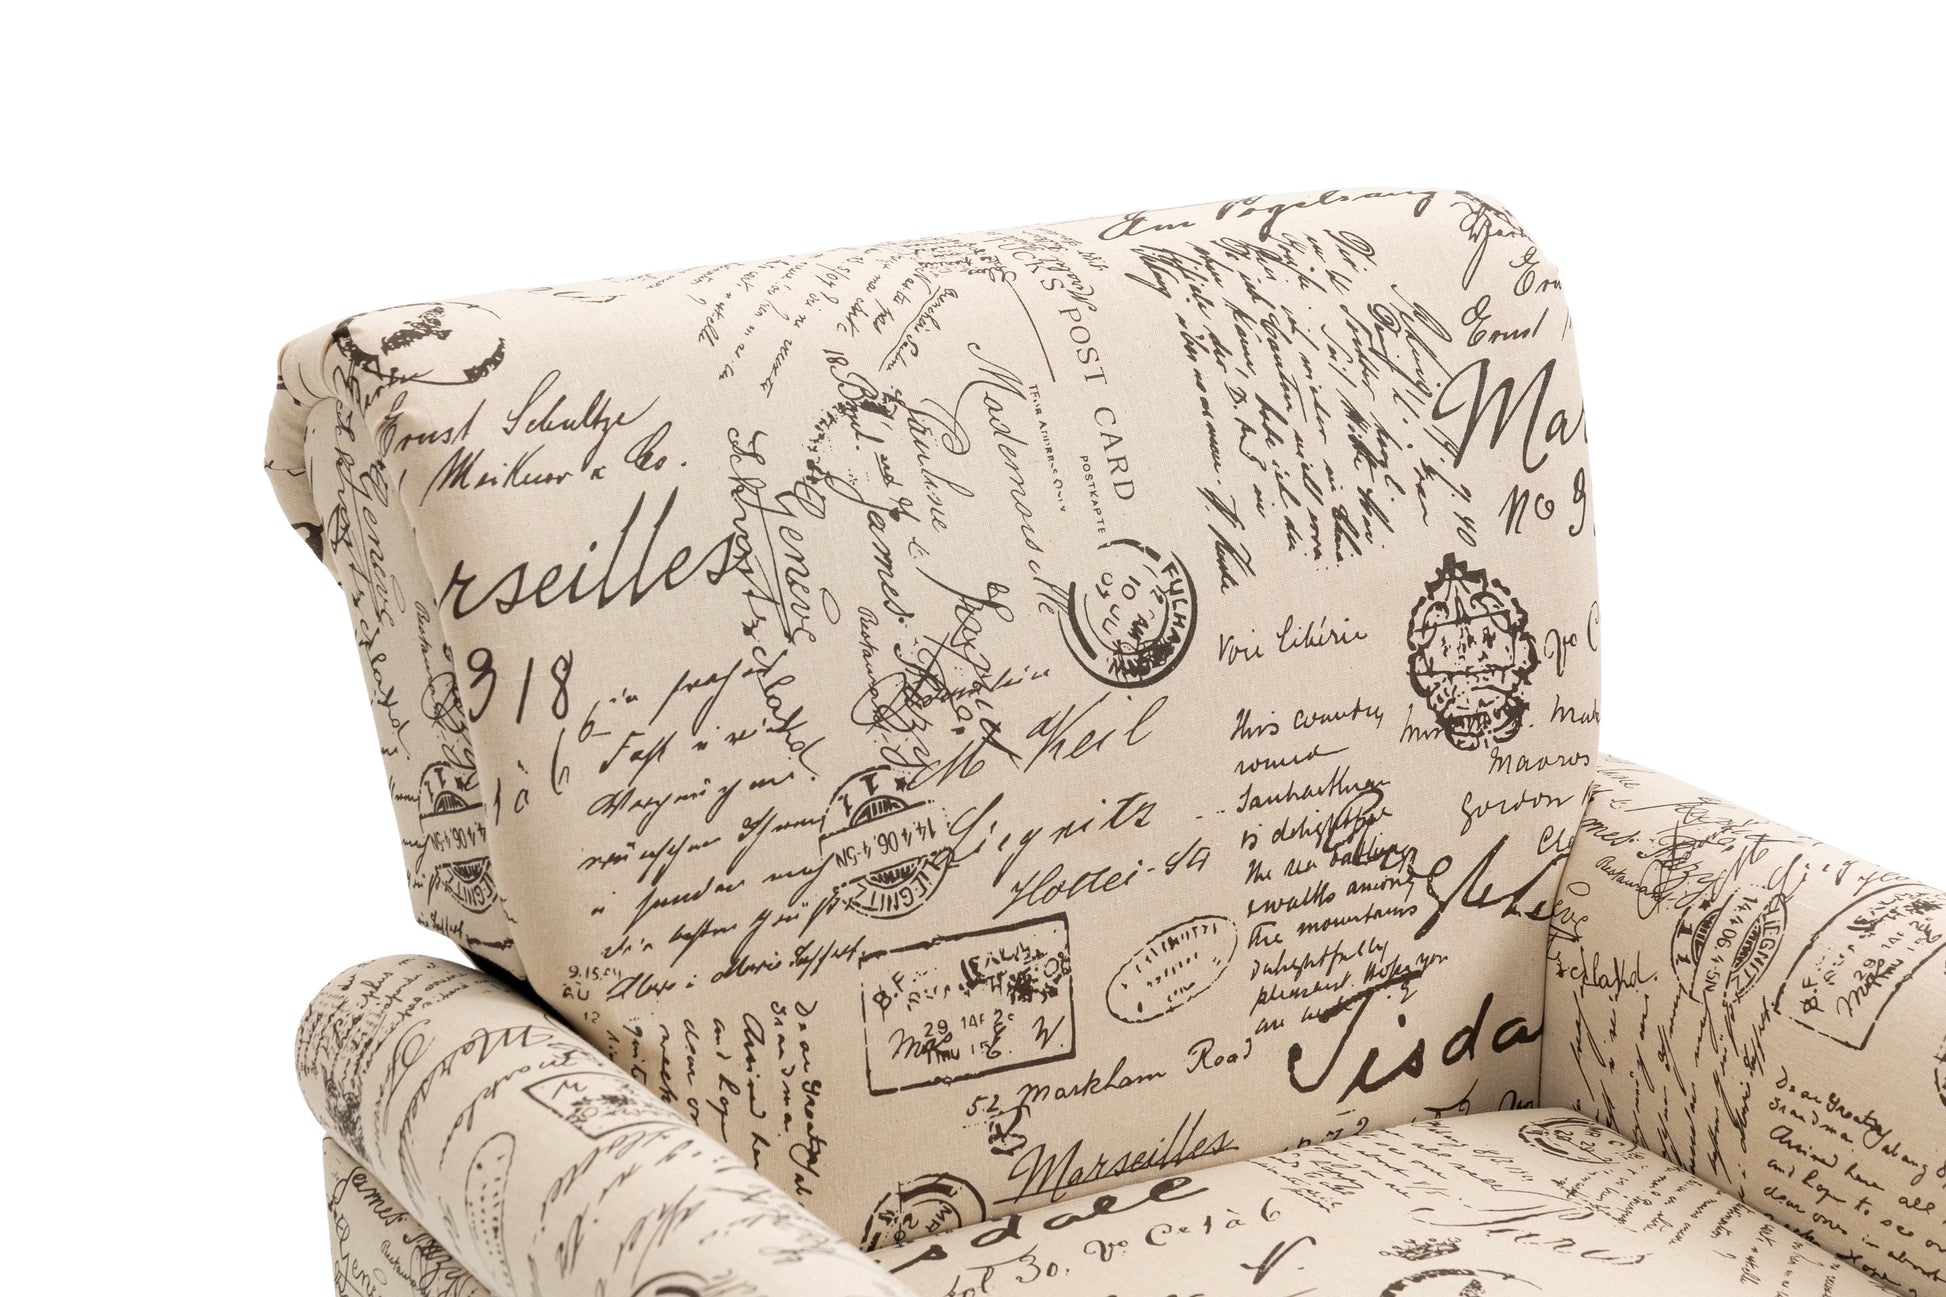 French Laundry Print Accent Arm Chair